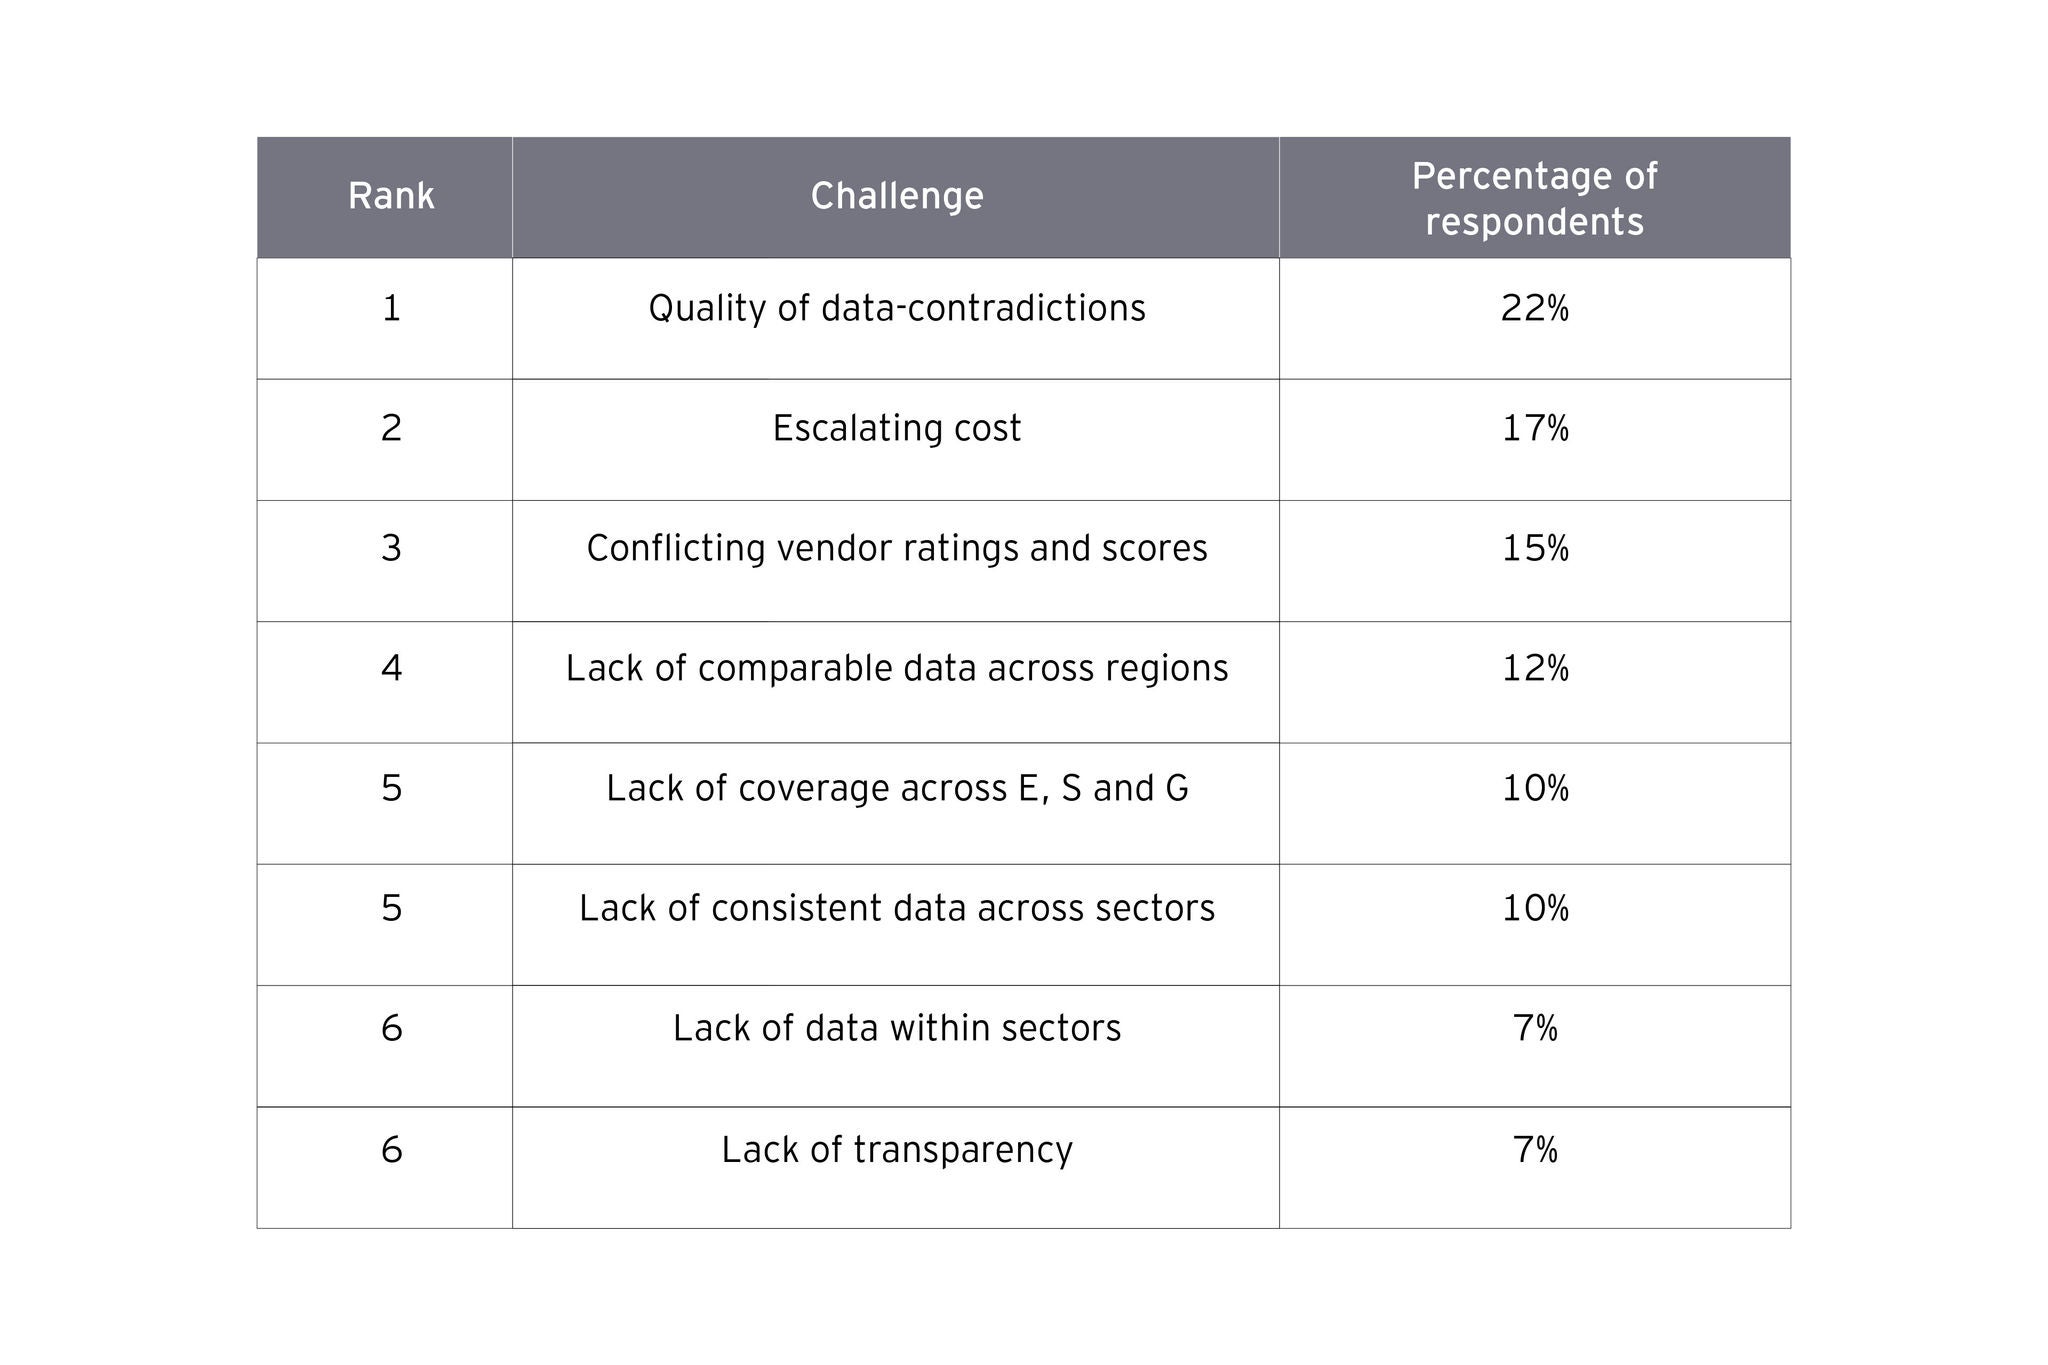 ey-top-challenges-of-esg-data-by-rank.jpg